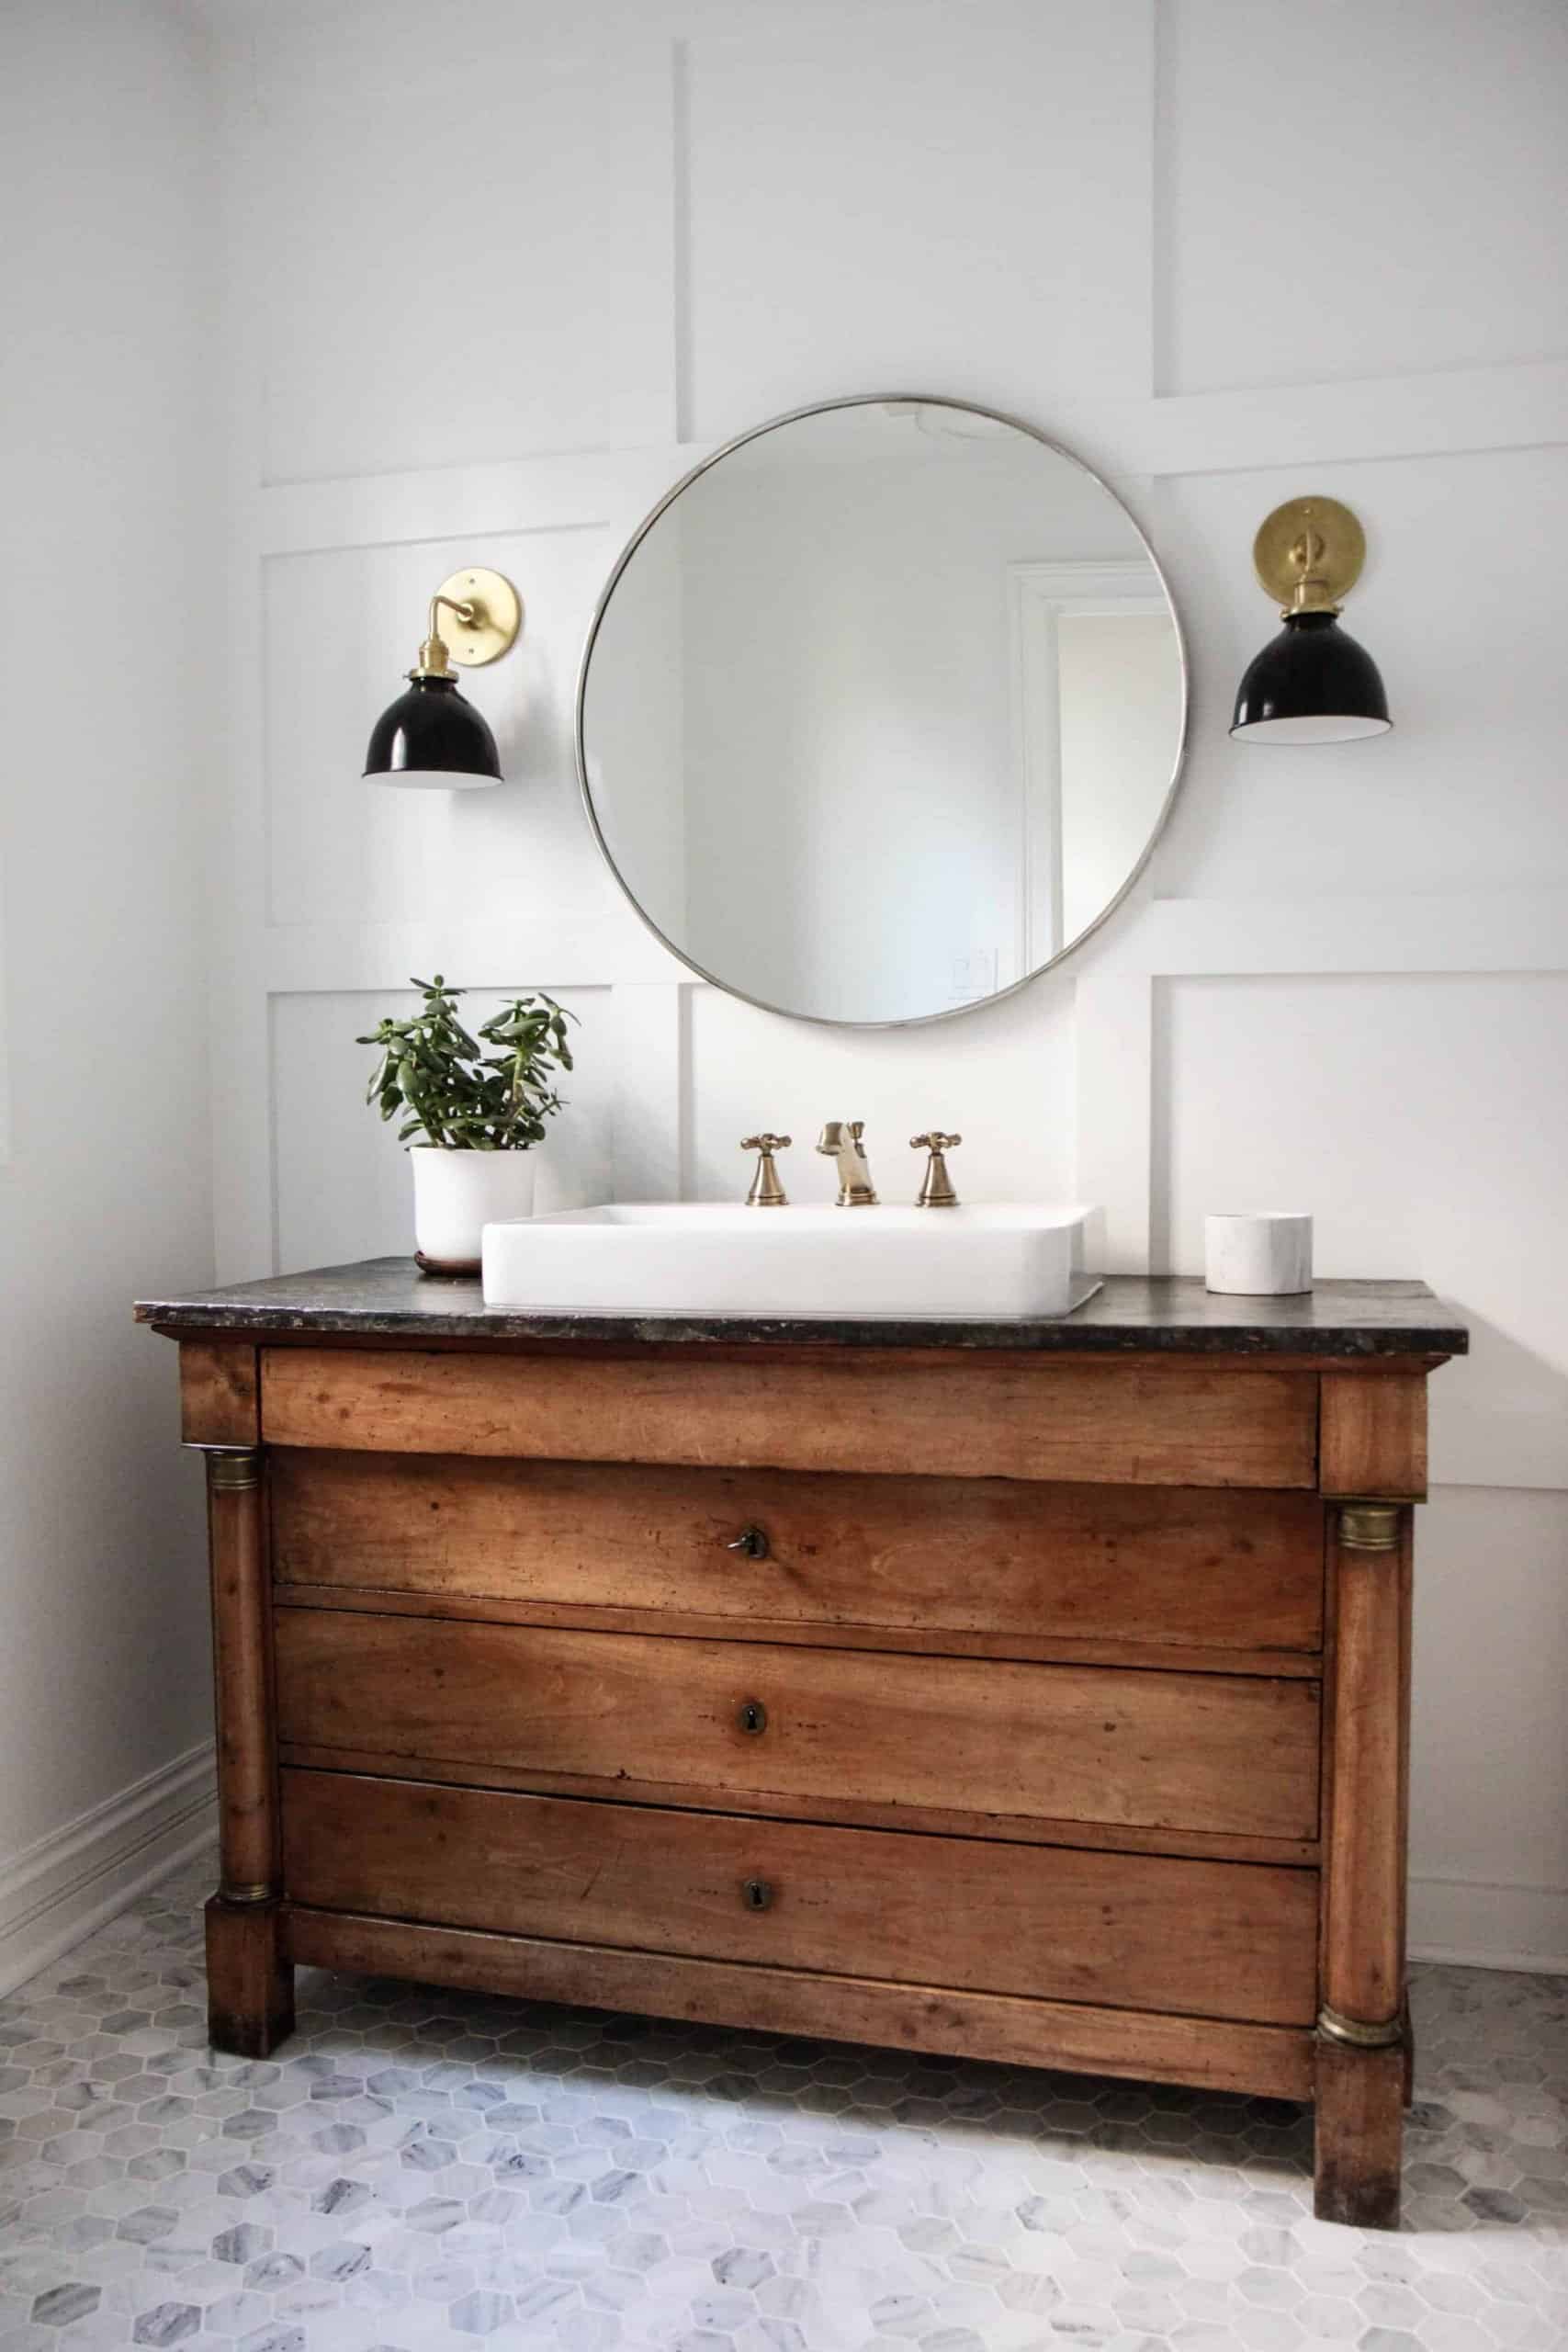 Another bathroom with hexagon floor times, these are marble tiles with white grout. The vintage vanity is a dark wood with drawers, and a white porcelain slink with brass faucets. A round mirror hangs between two vintage black and white wall sconces. The wall is covered in square wainscoting.